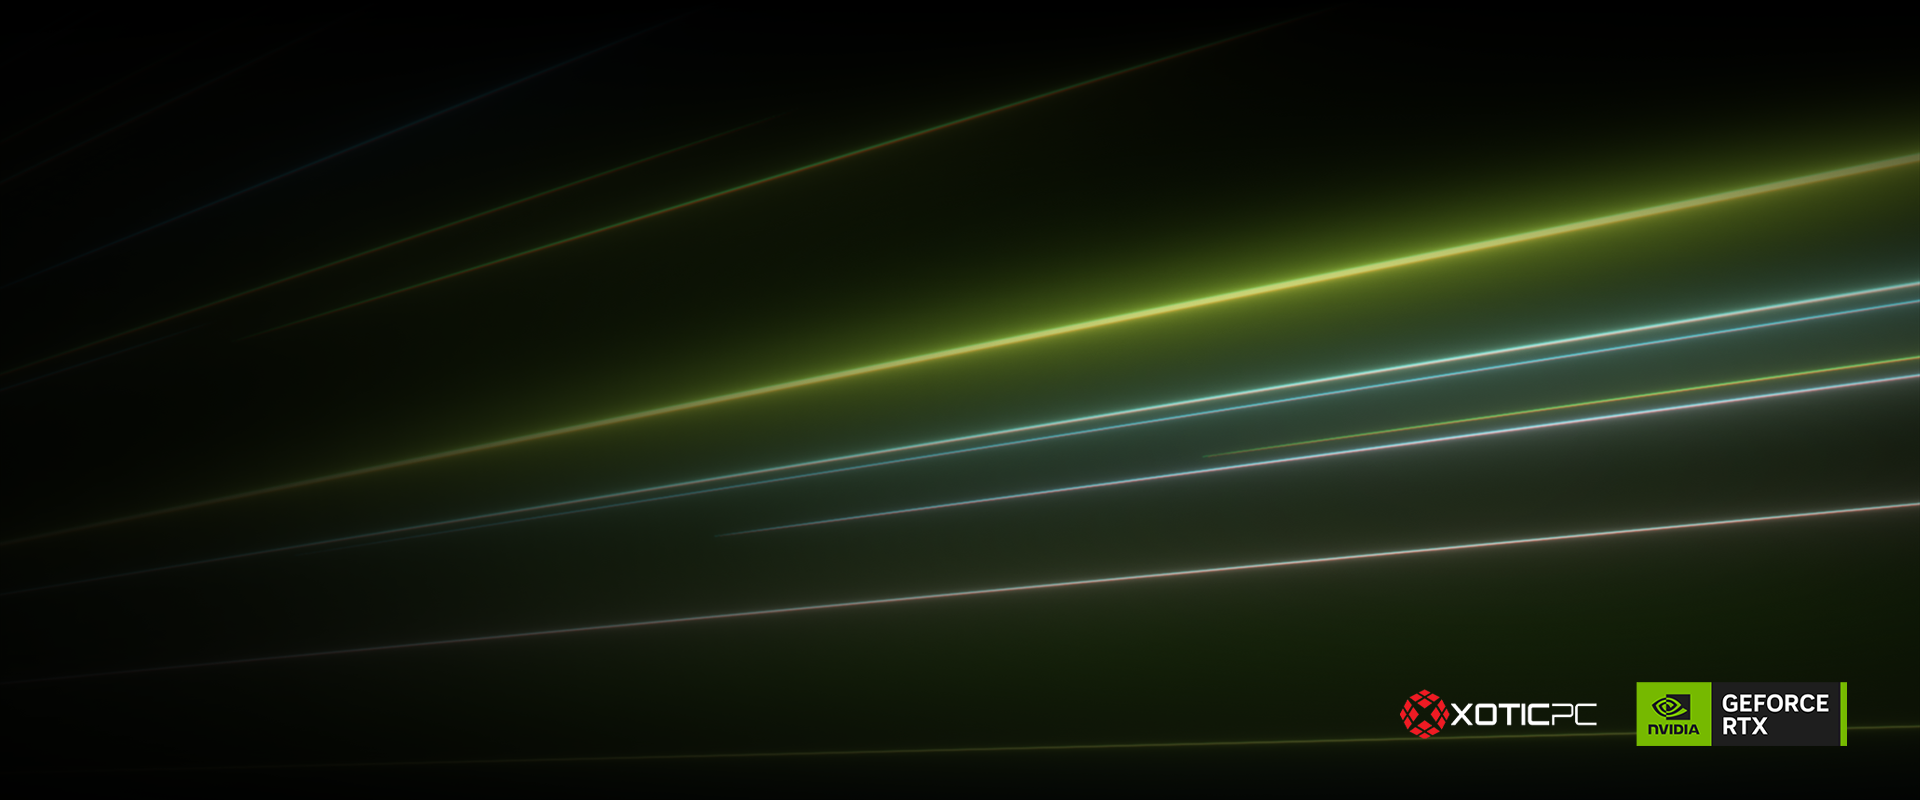 View and listen to live stream of GeForce at CES 2024.